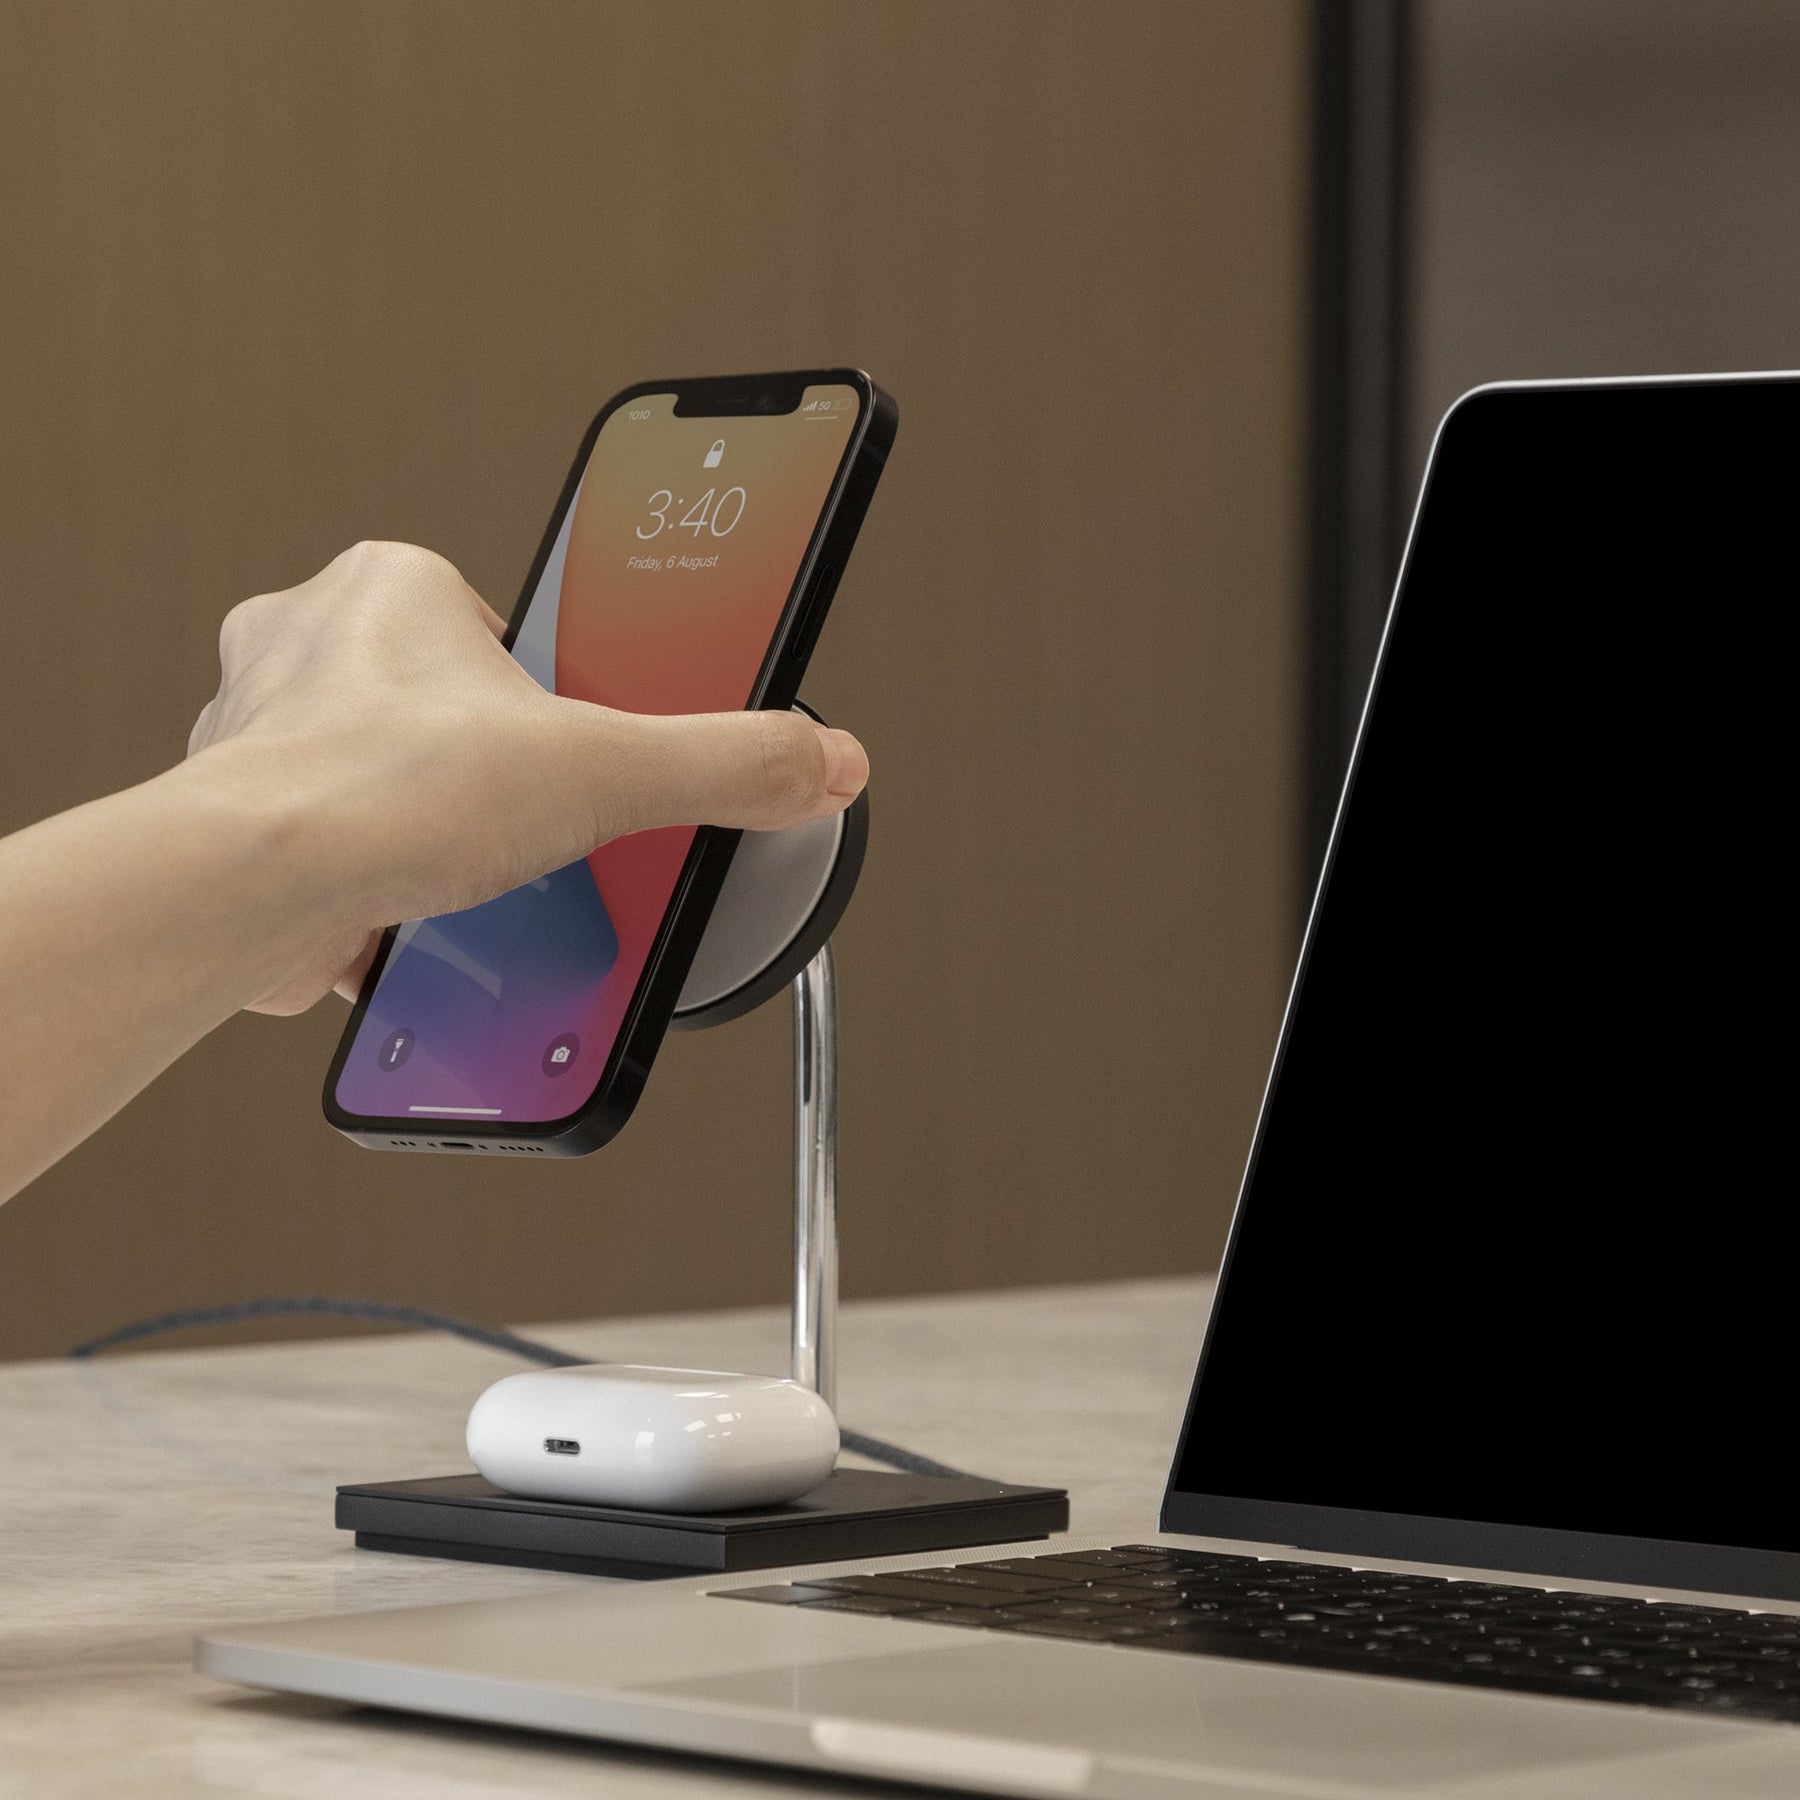 Ugreen 3-in-1 MagSafe stand charges your iPhone with a twist